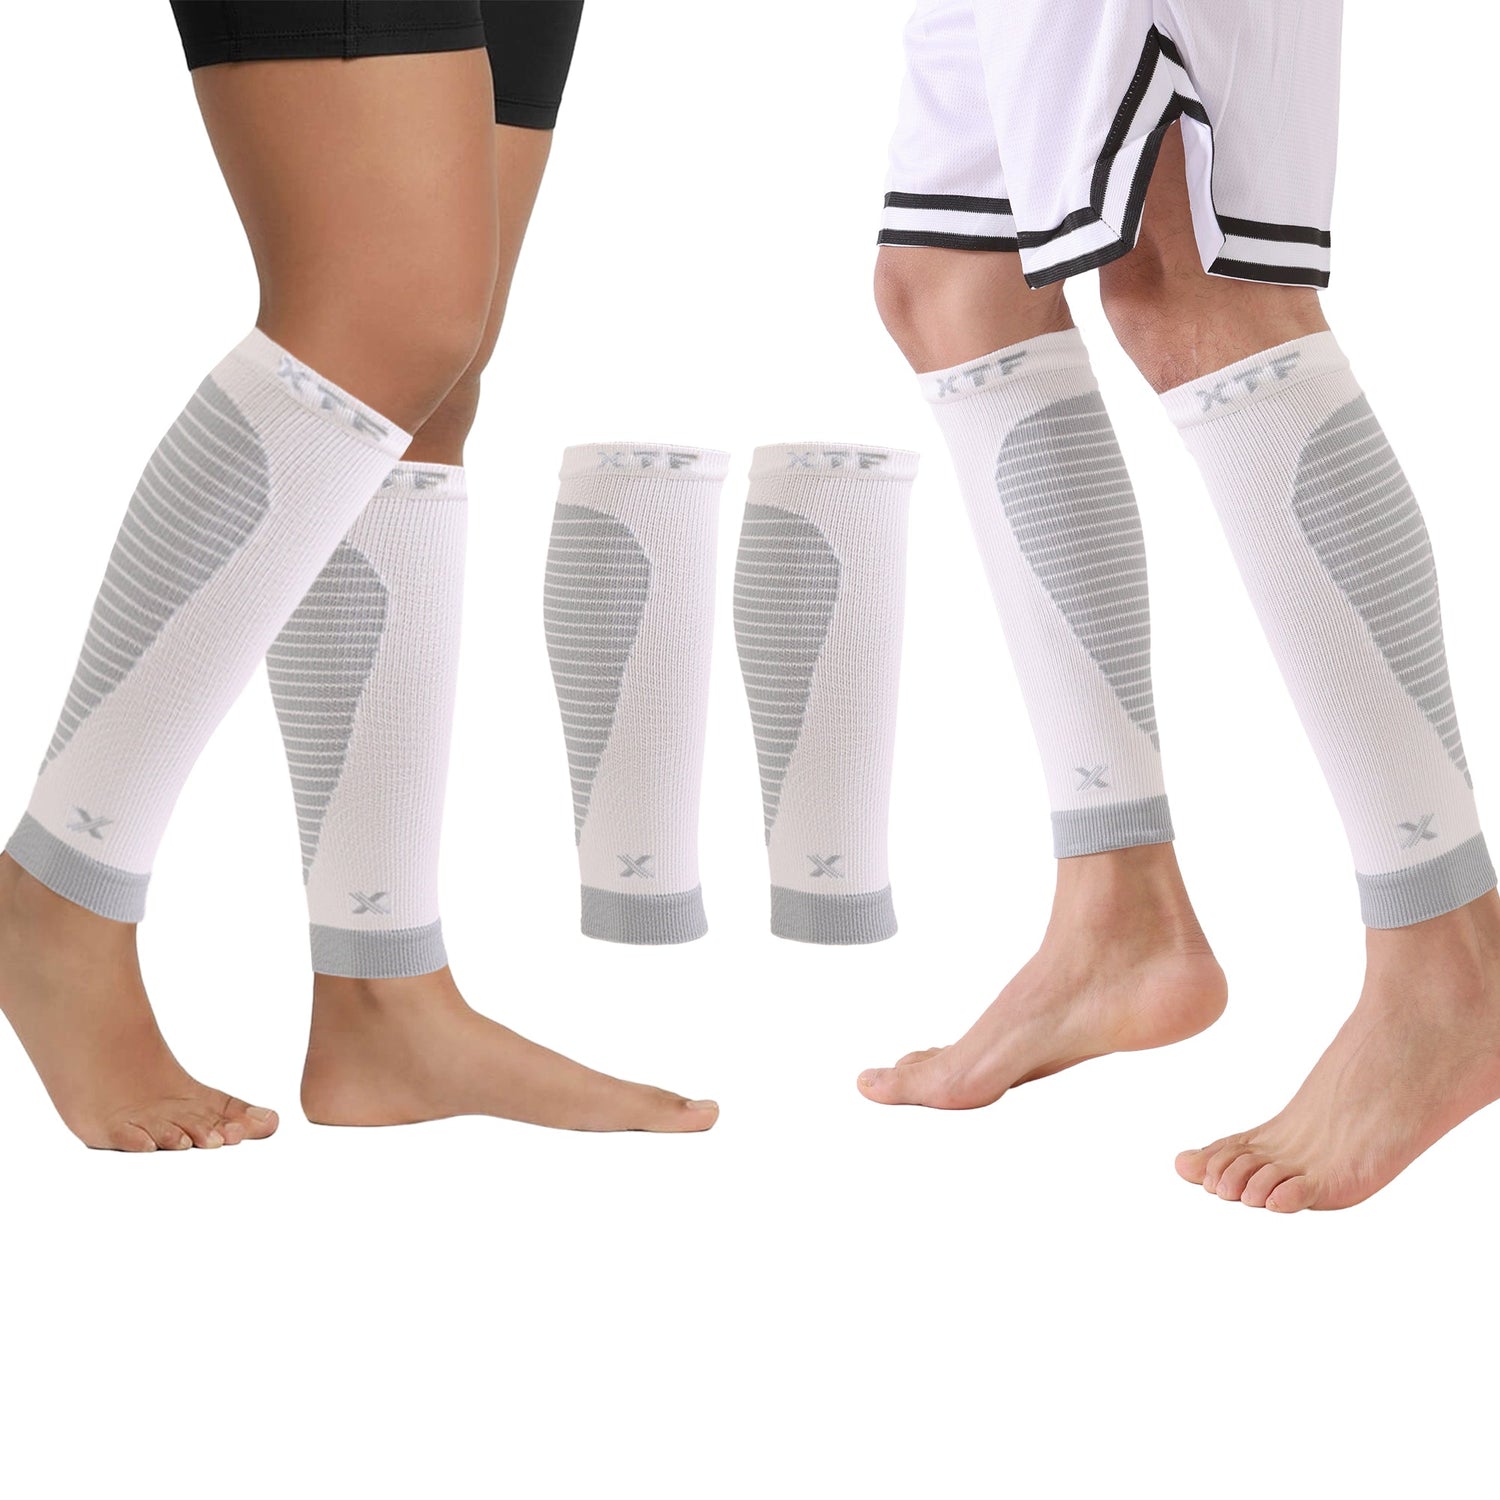 Calf Support Sleeve – Extreme Fit